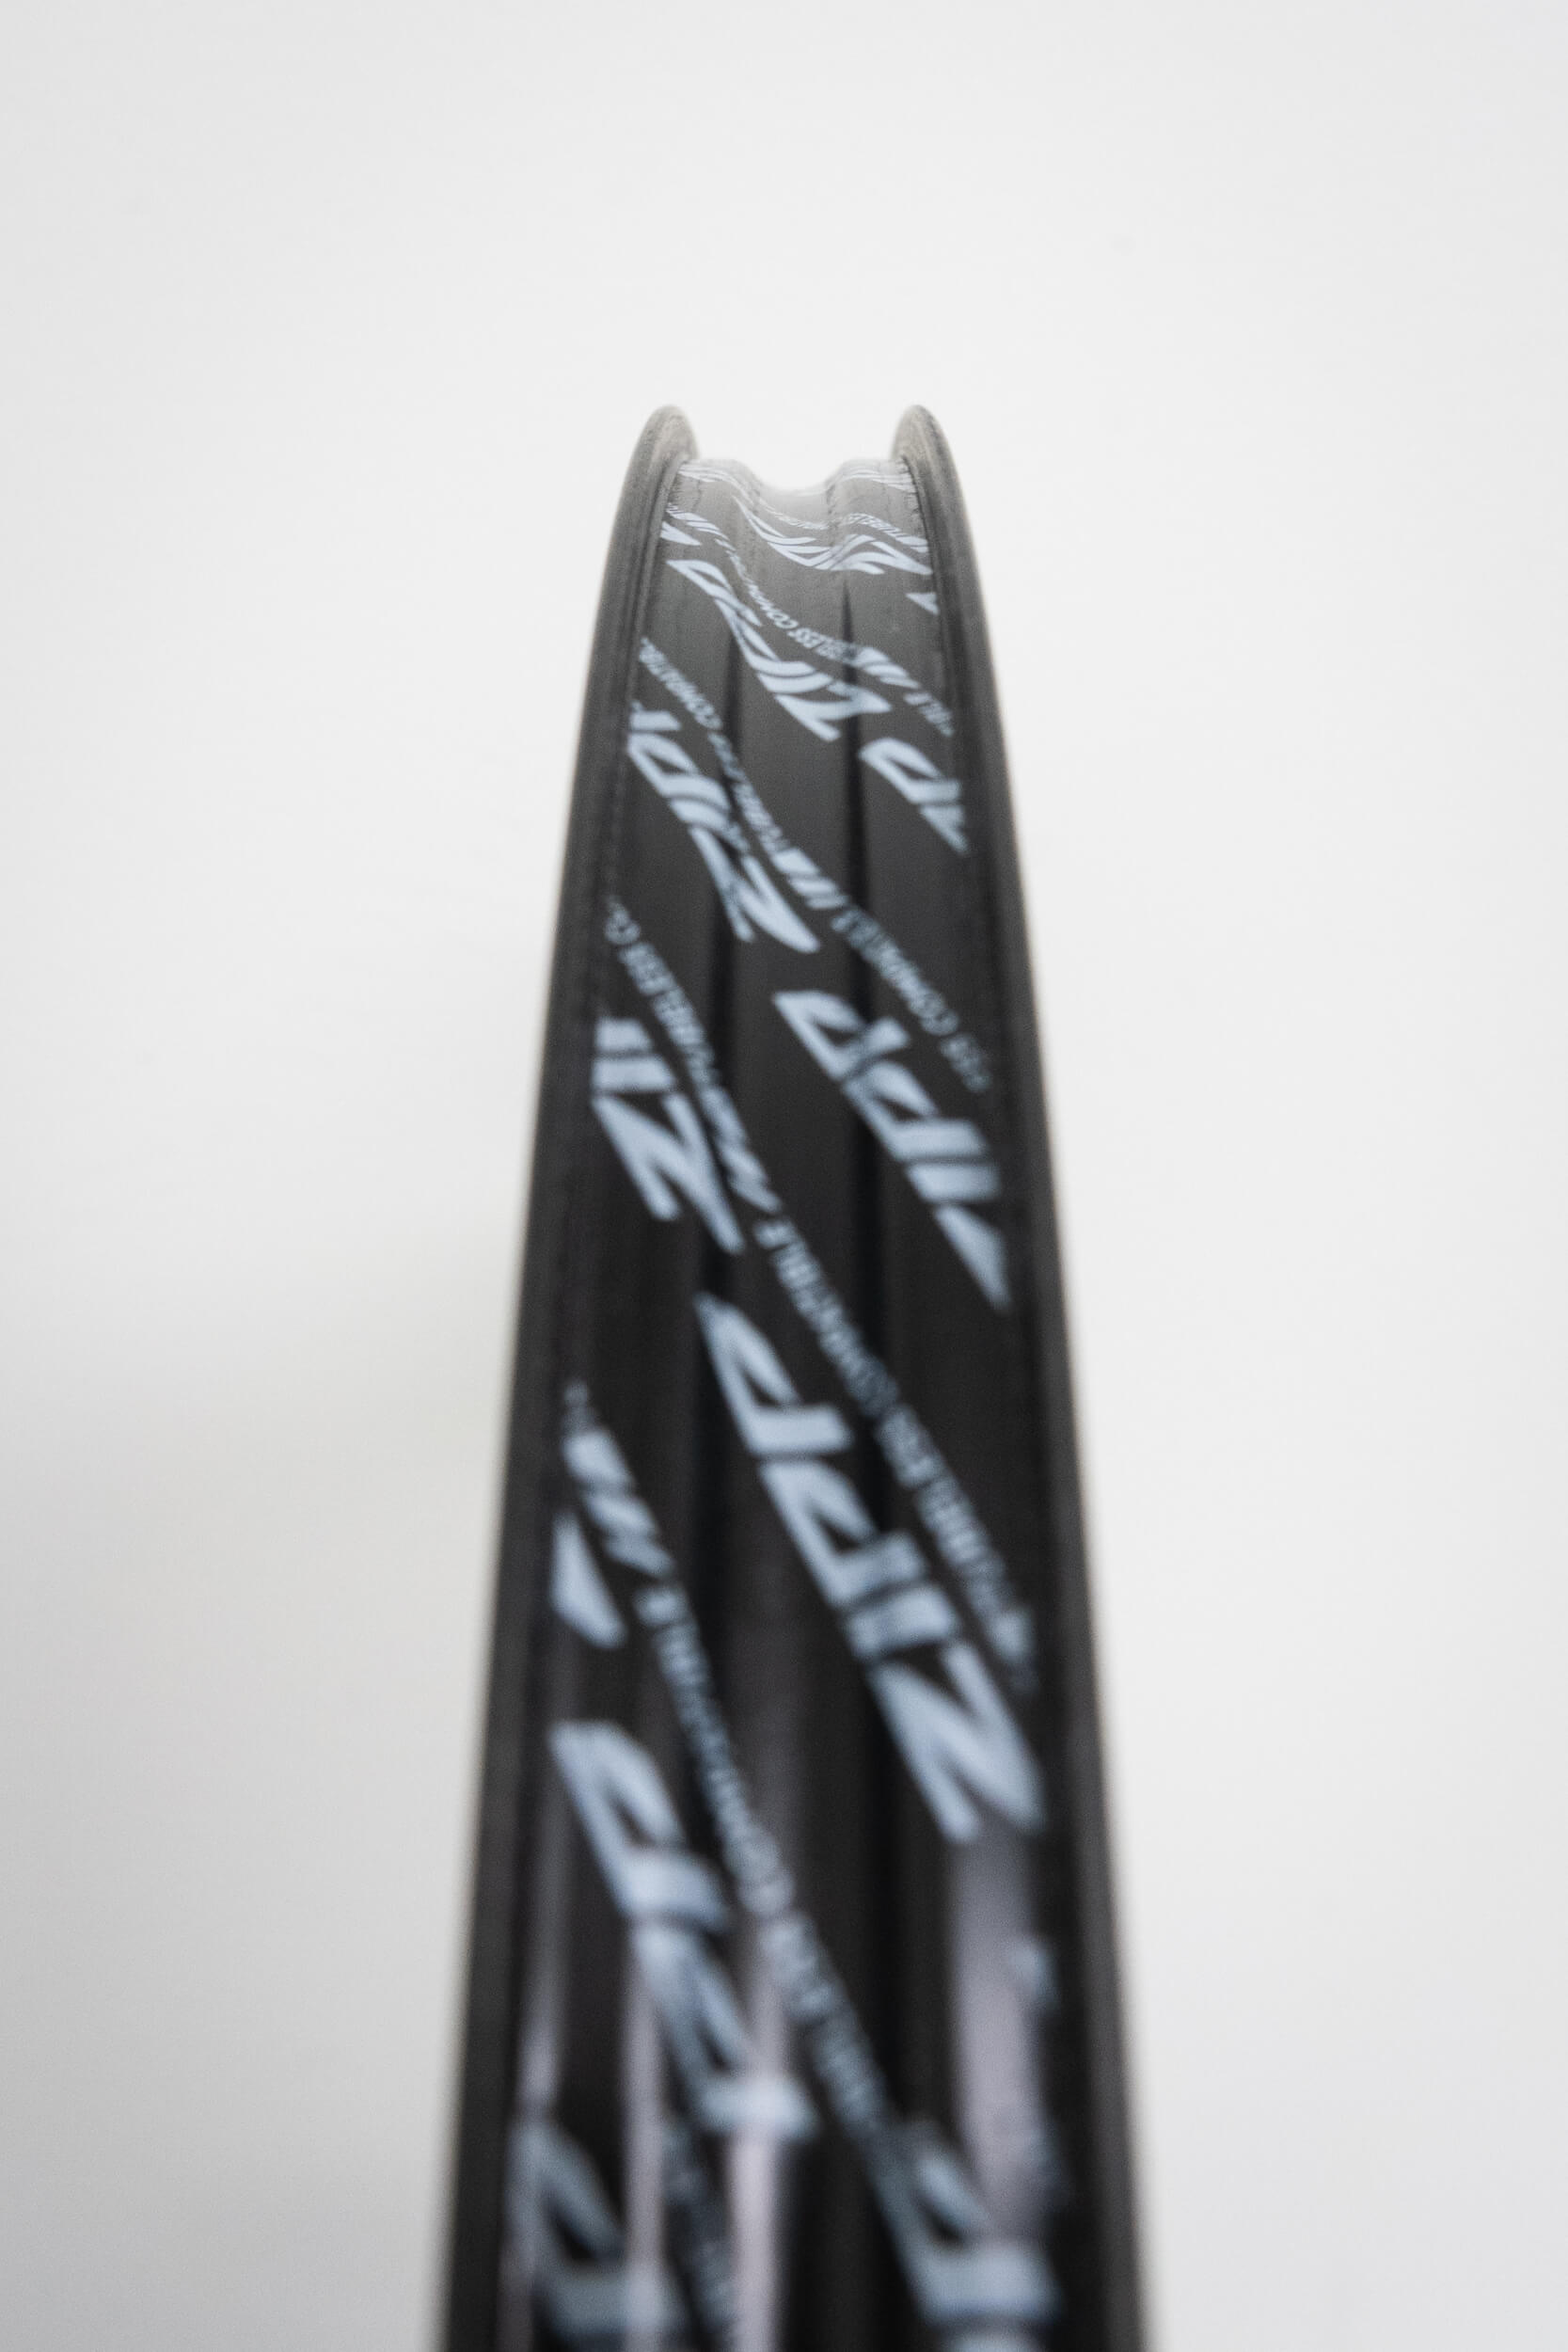 Is A Road Tubeless System Right For You?